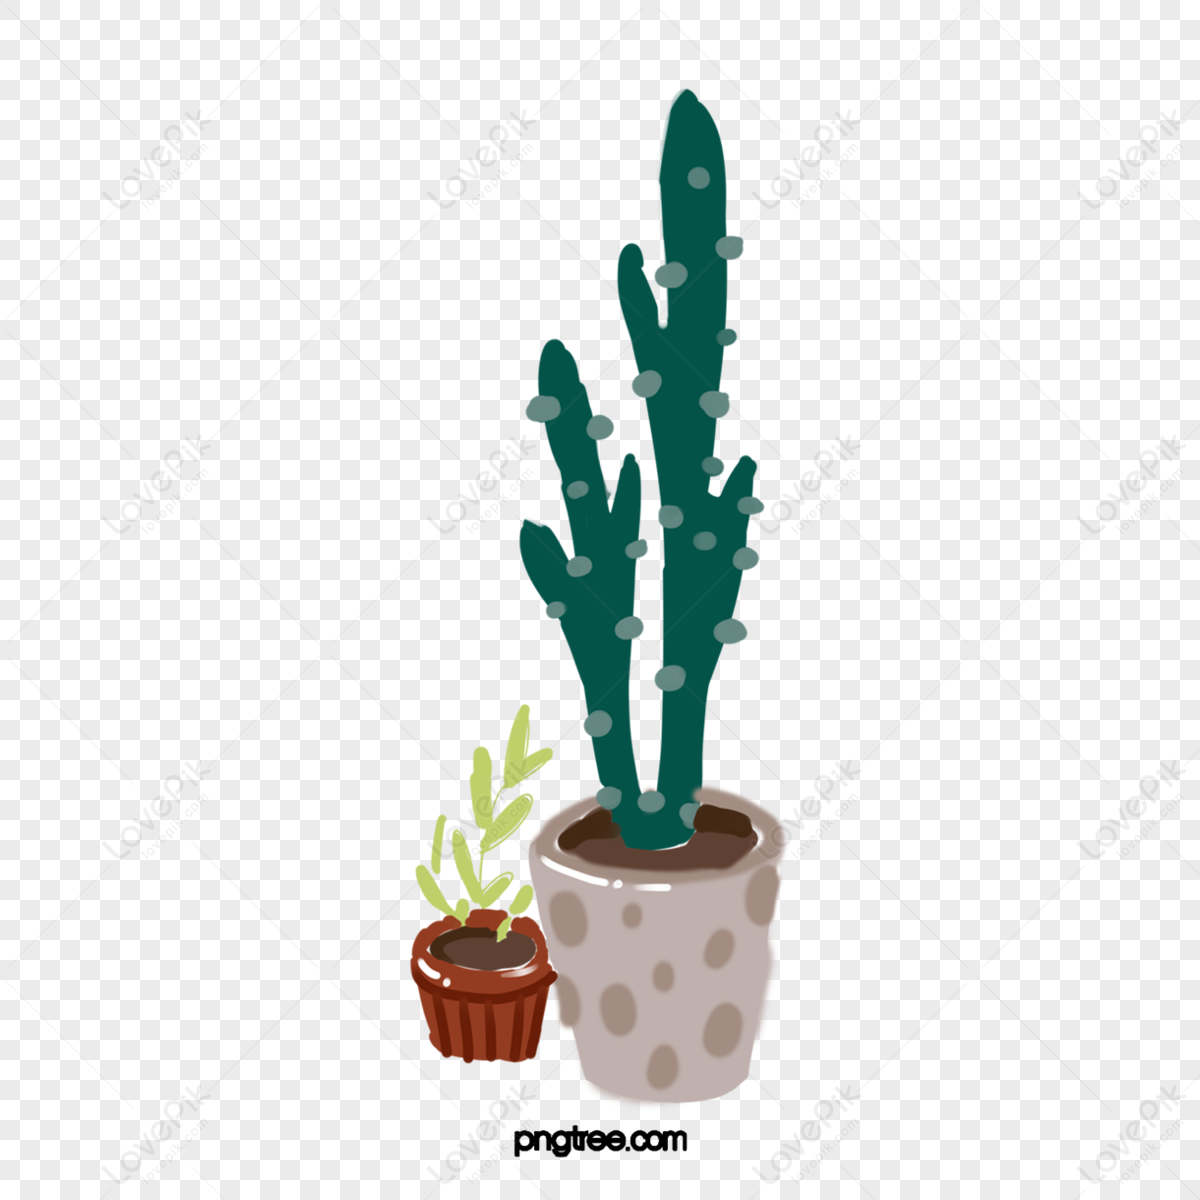 cactus and plant pots 9357097 PNG